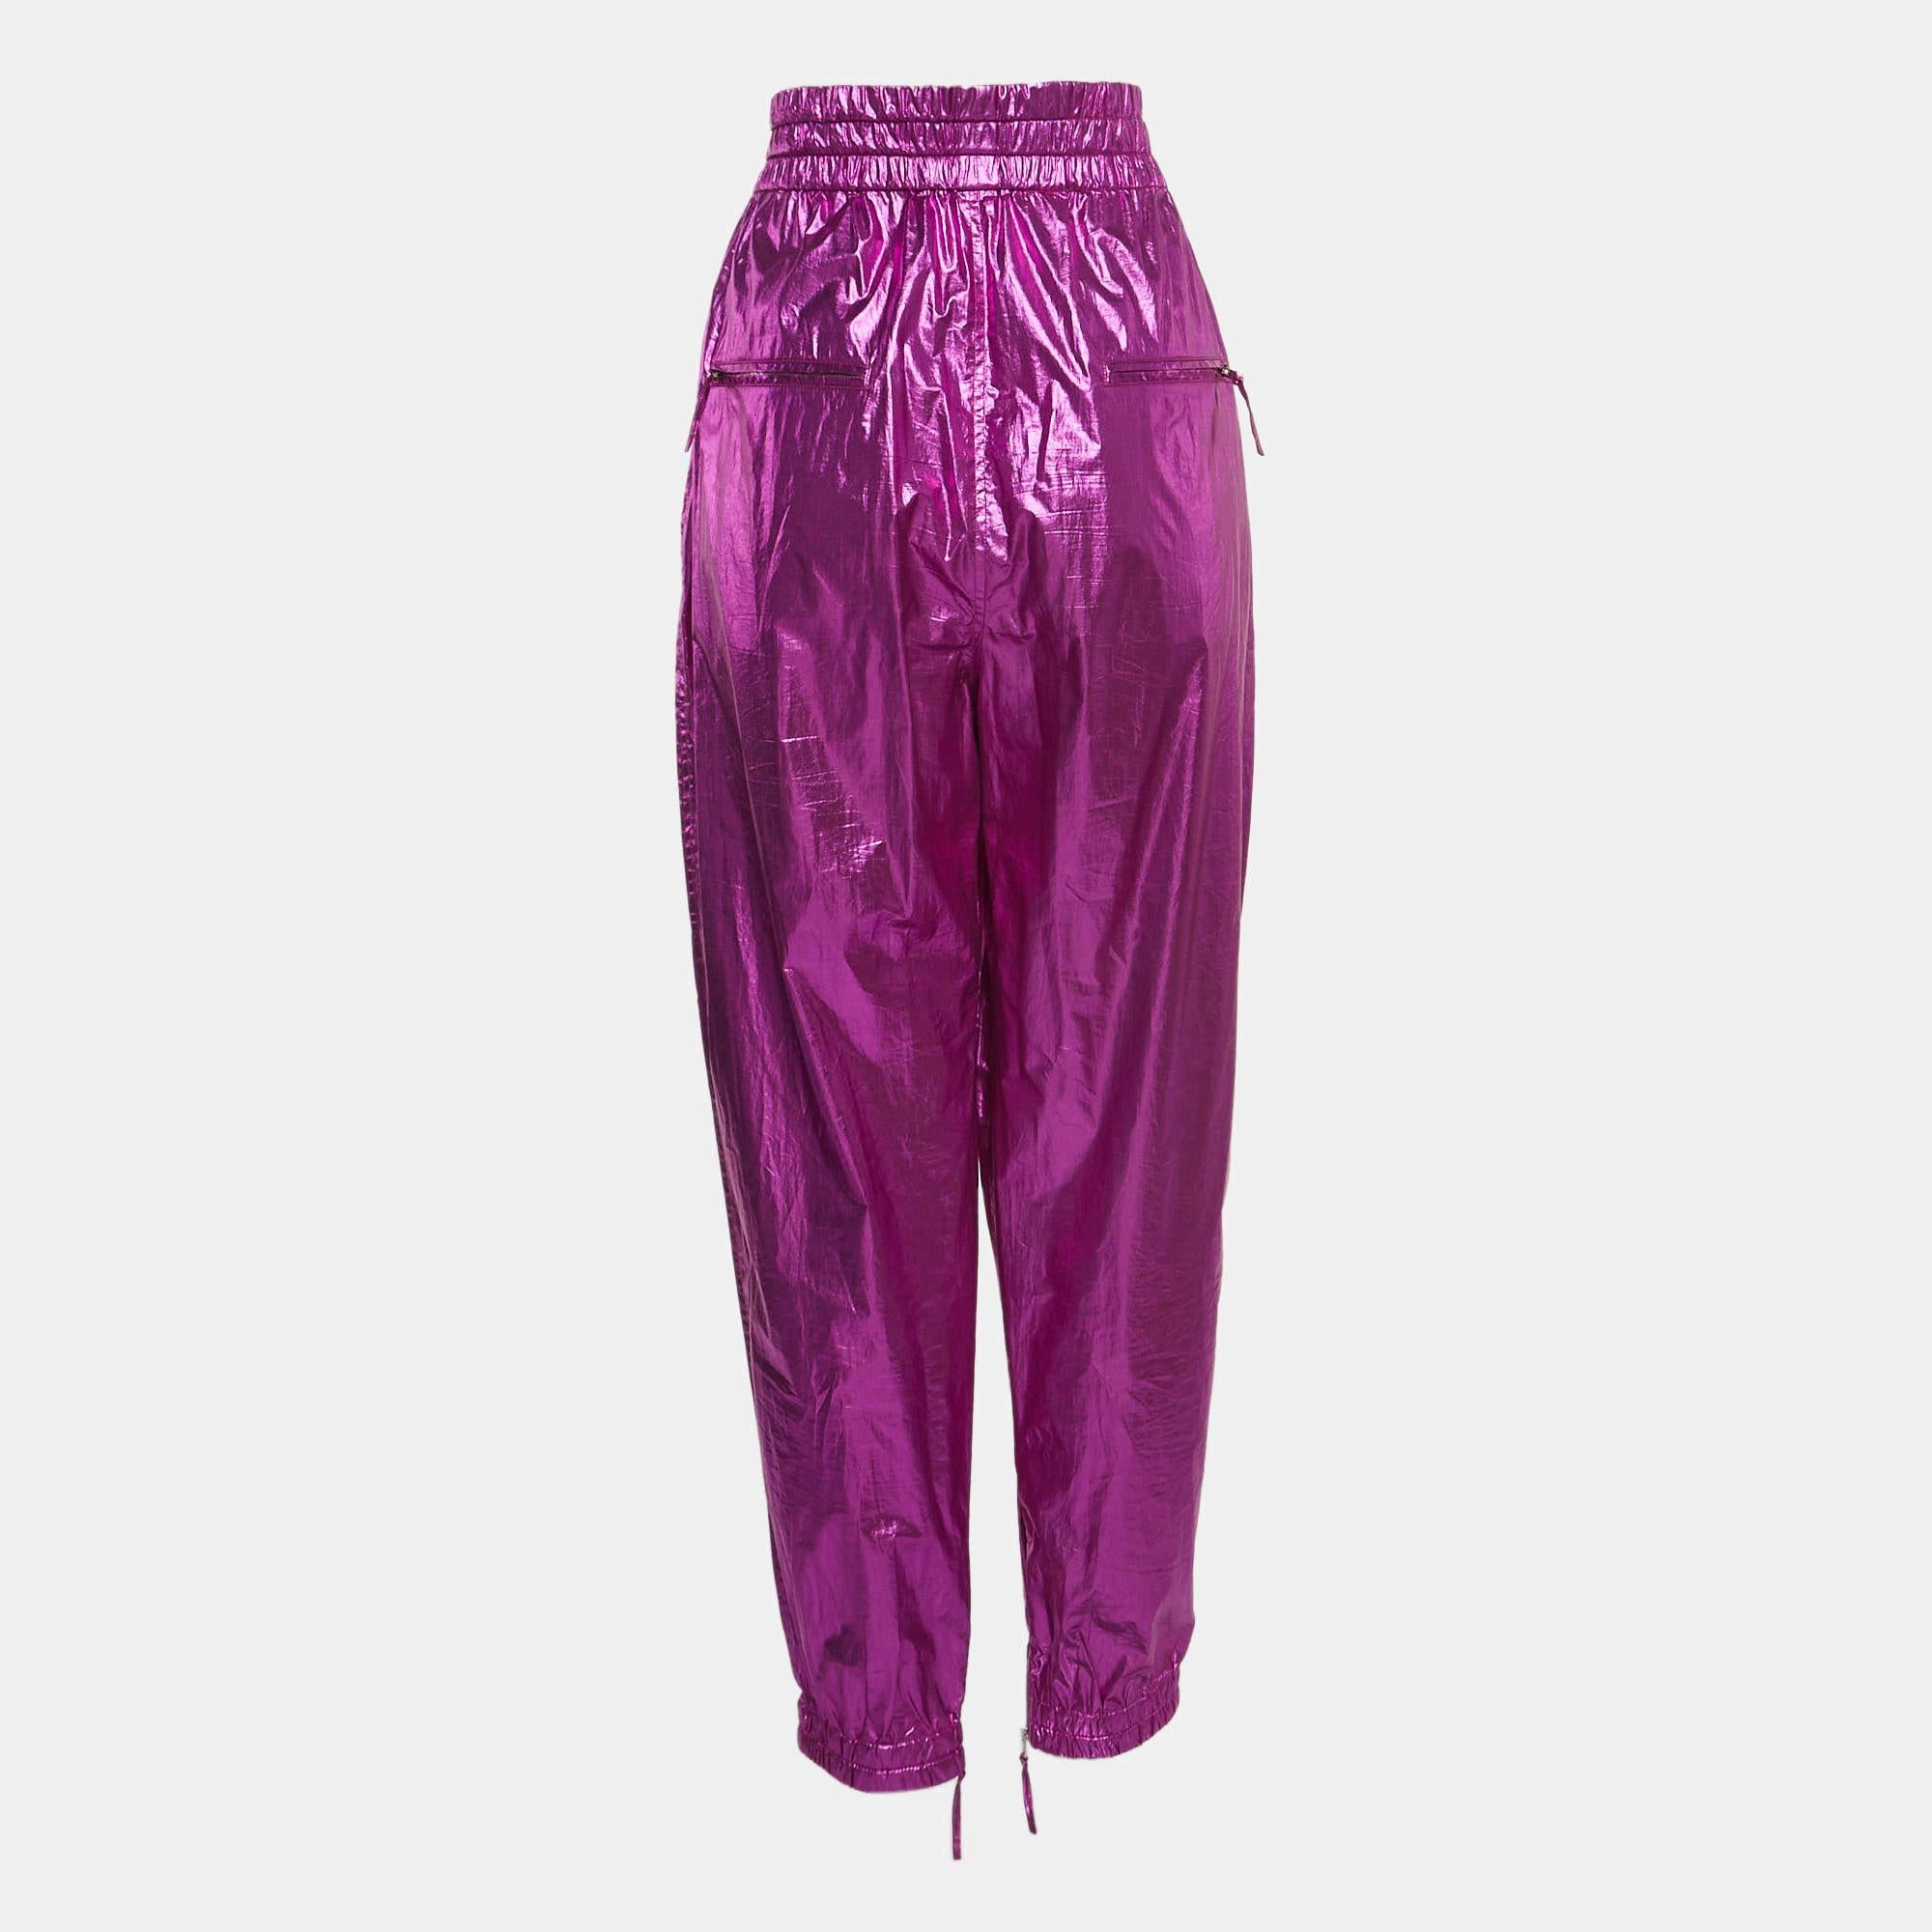 The Isabel Marant trousers blend contemporary style with comfort. Crafted from high-quality cotton, these trousers feature a metallic pink hue, a flattering carrot-fit silhouette, and Galoni detailing, making them a chic and versatile choice for